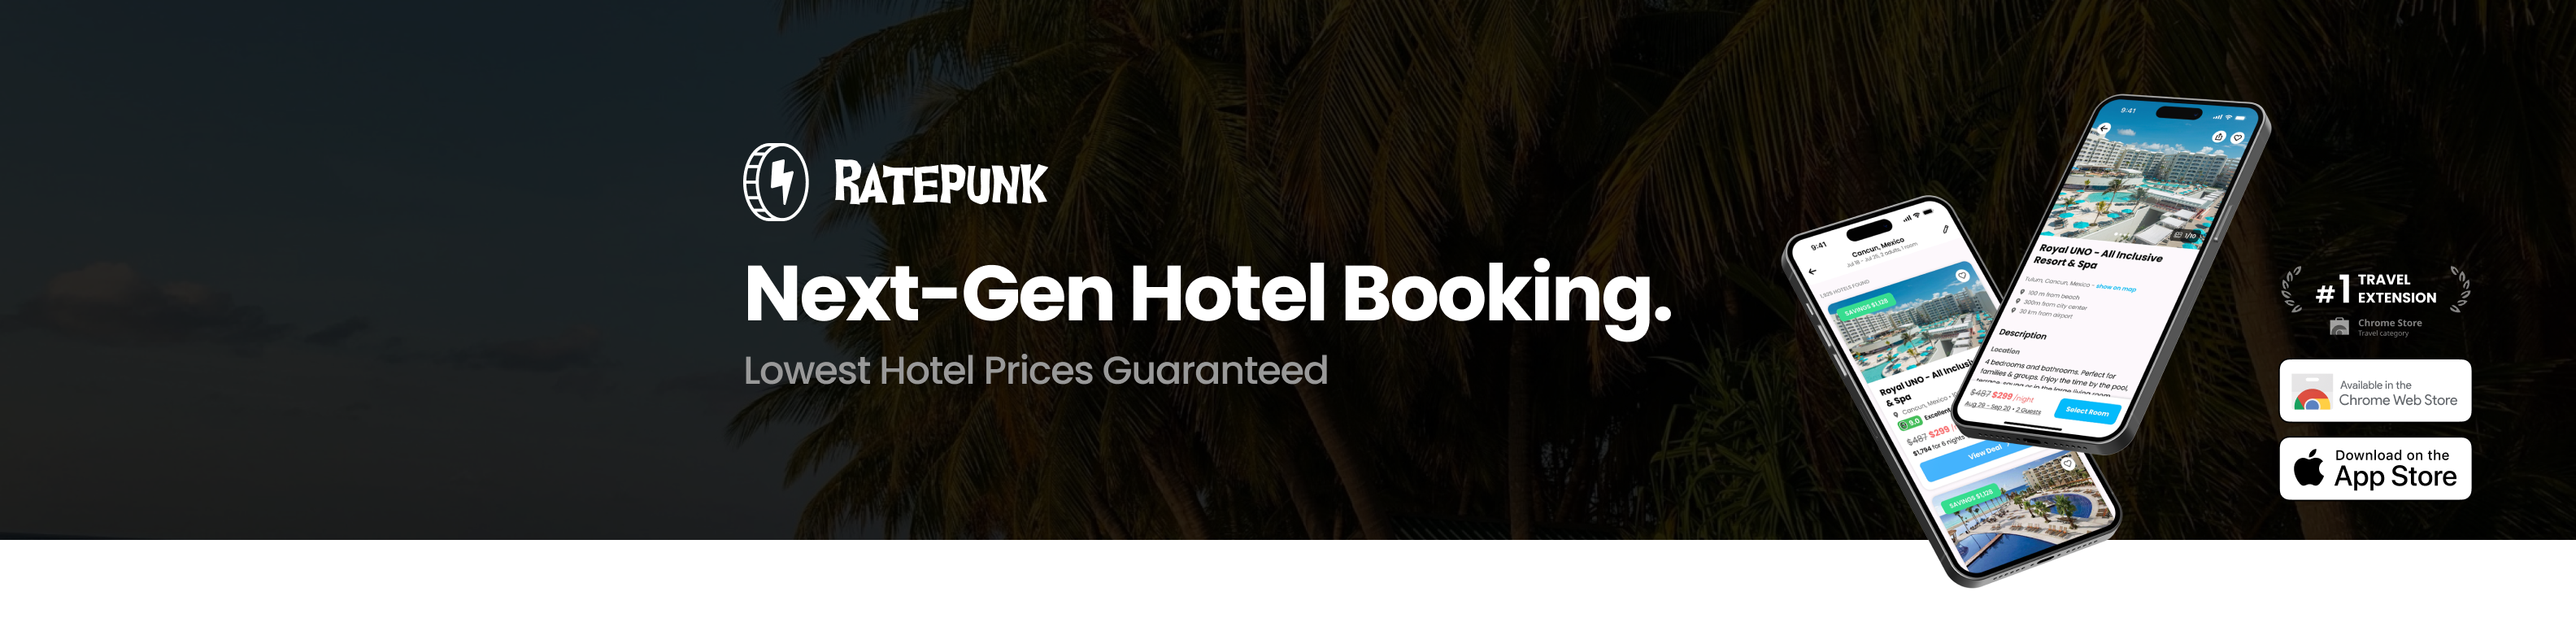 ratepunk  - next gen hotel booking- lowest hotel prices guaranteed